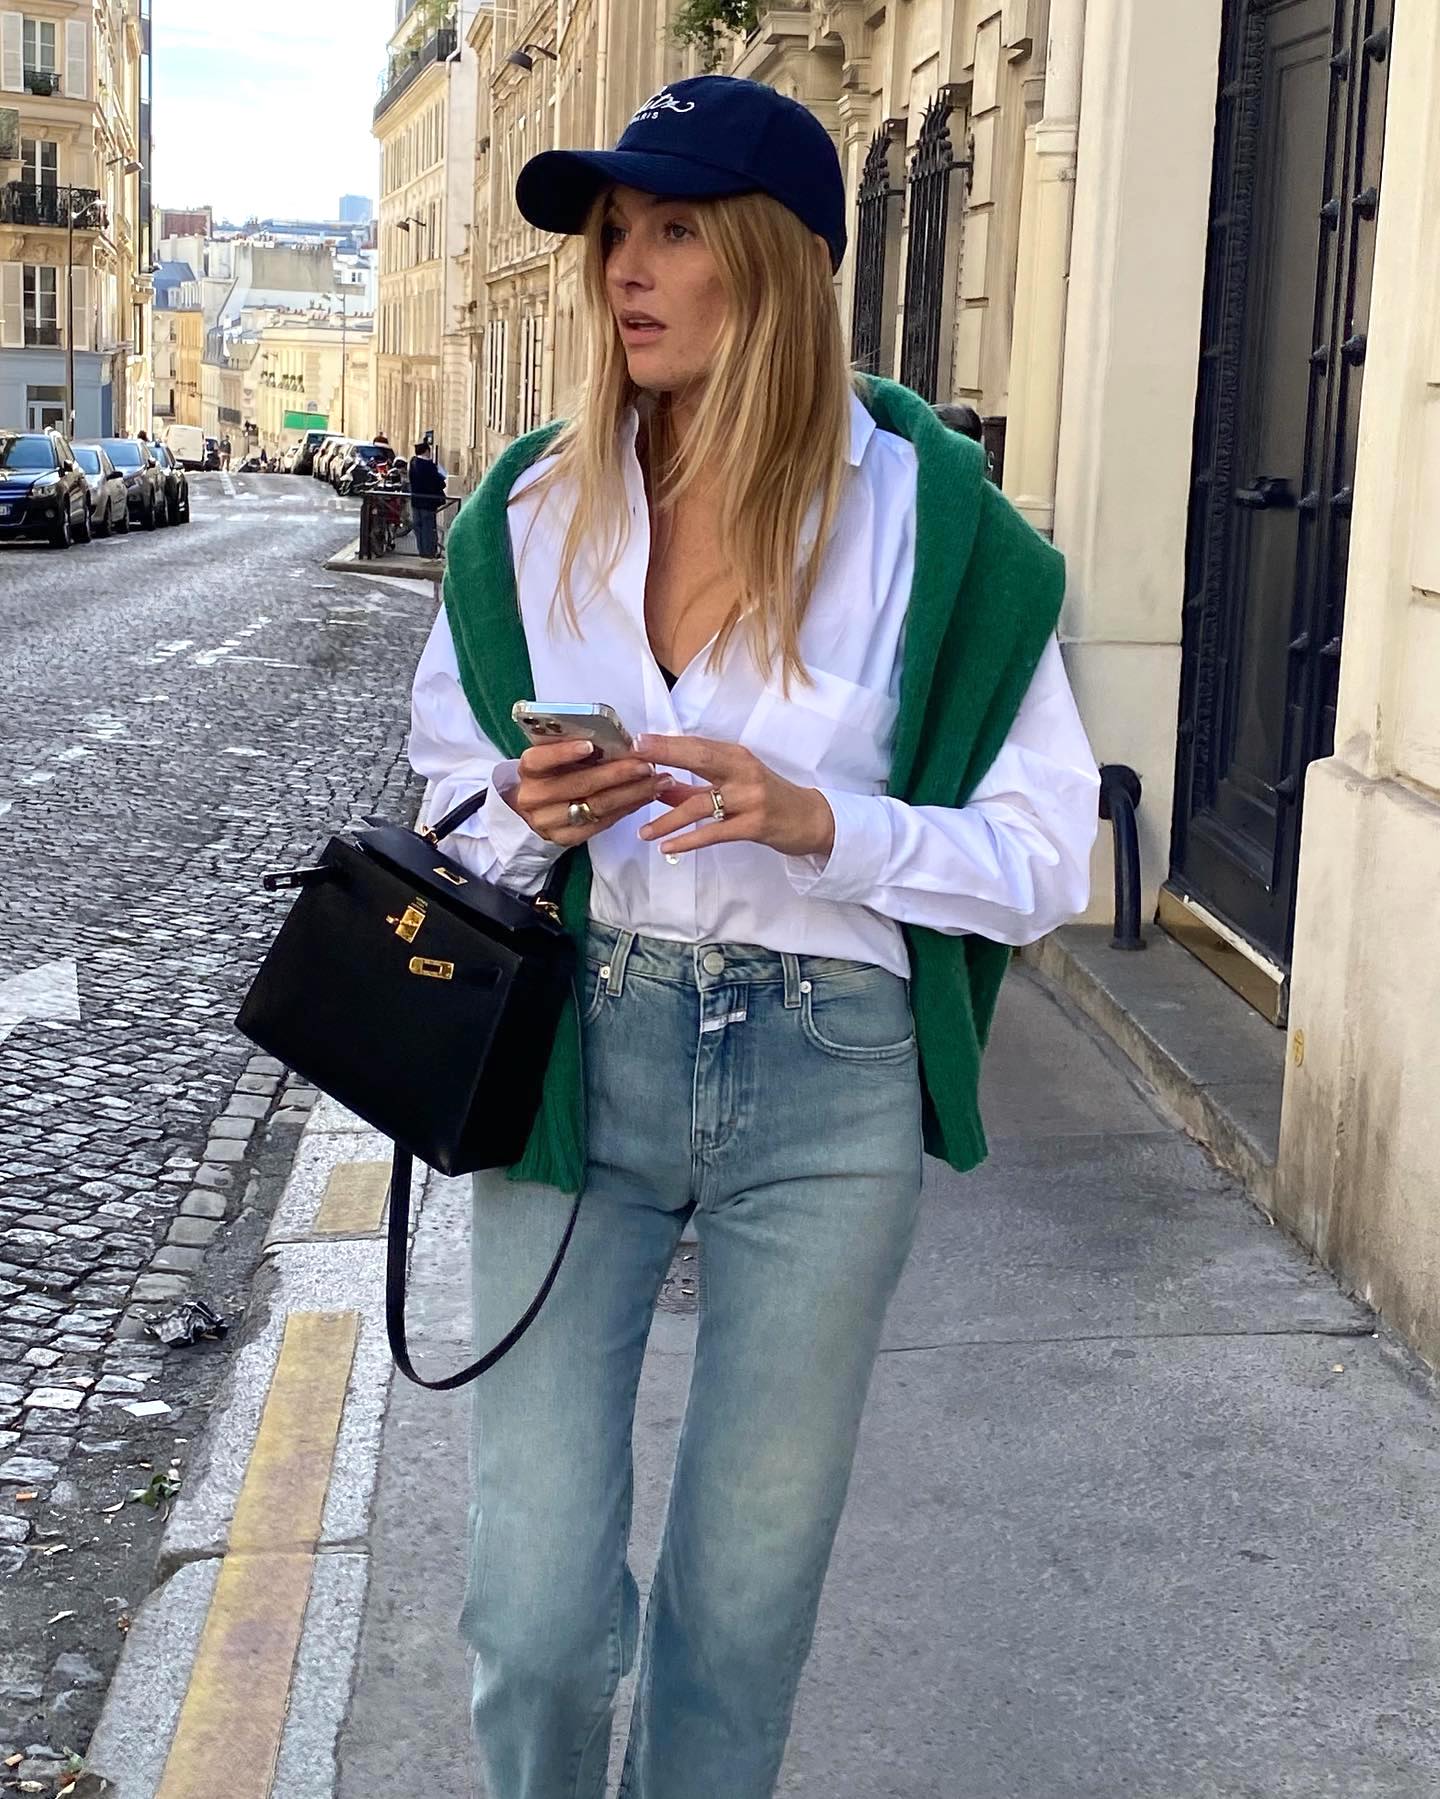 fashion influencer Camille Charriere on a sidewalk in Paris wearing a baseball cap, white button-down shirt, green sweater over the shoulders, jeans, and an Hermès bag